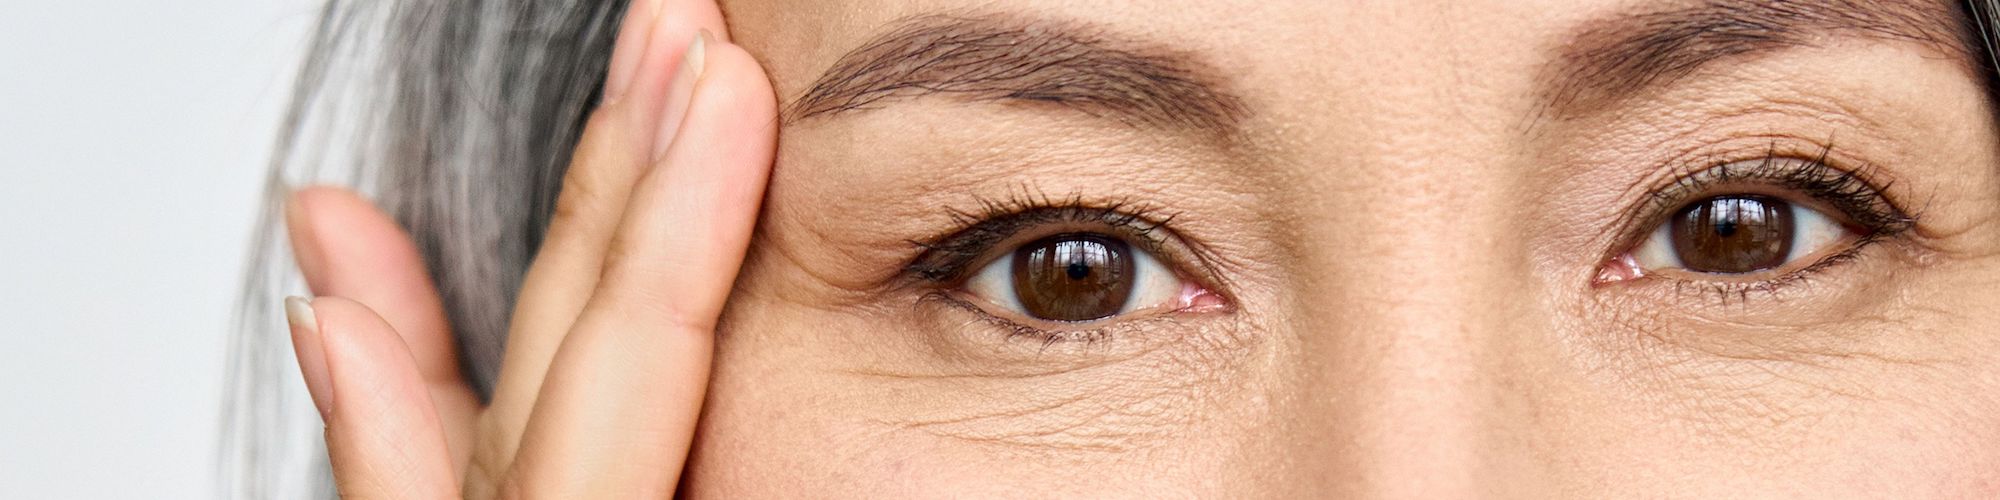 Mature lady with wrinkles around eye area